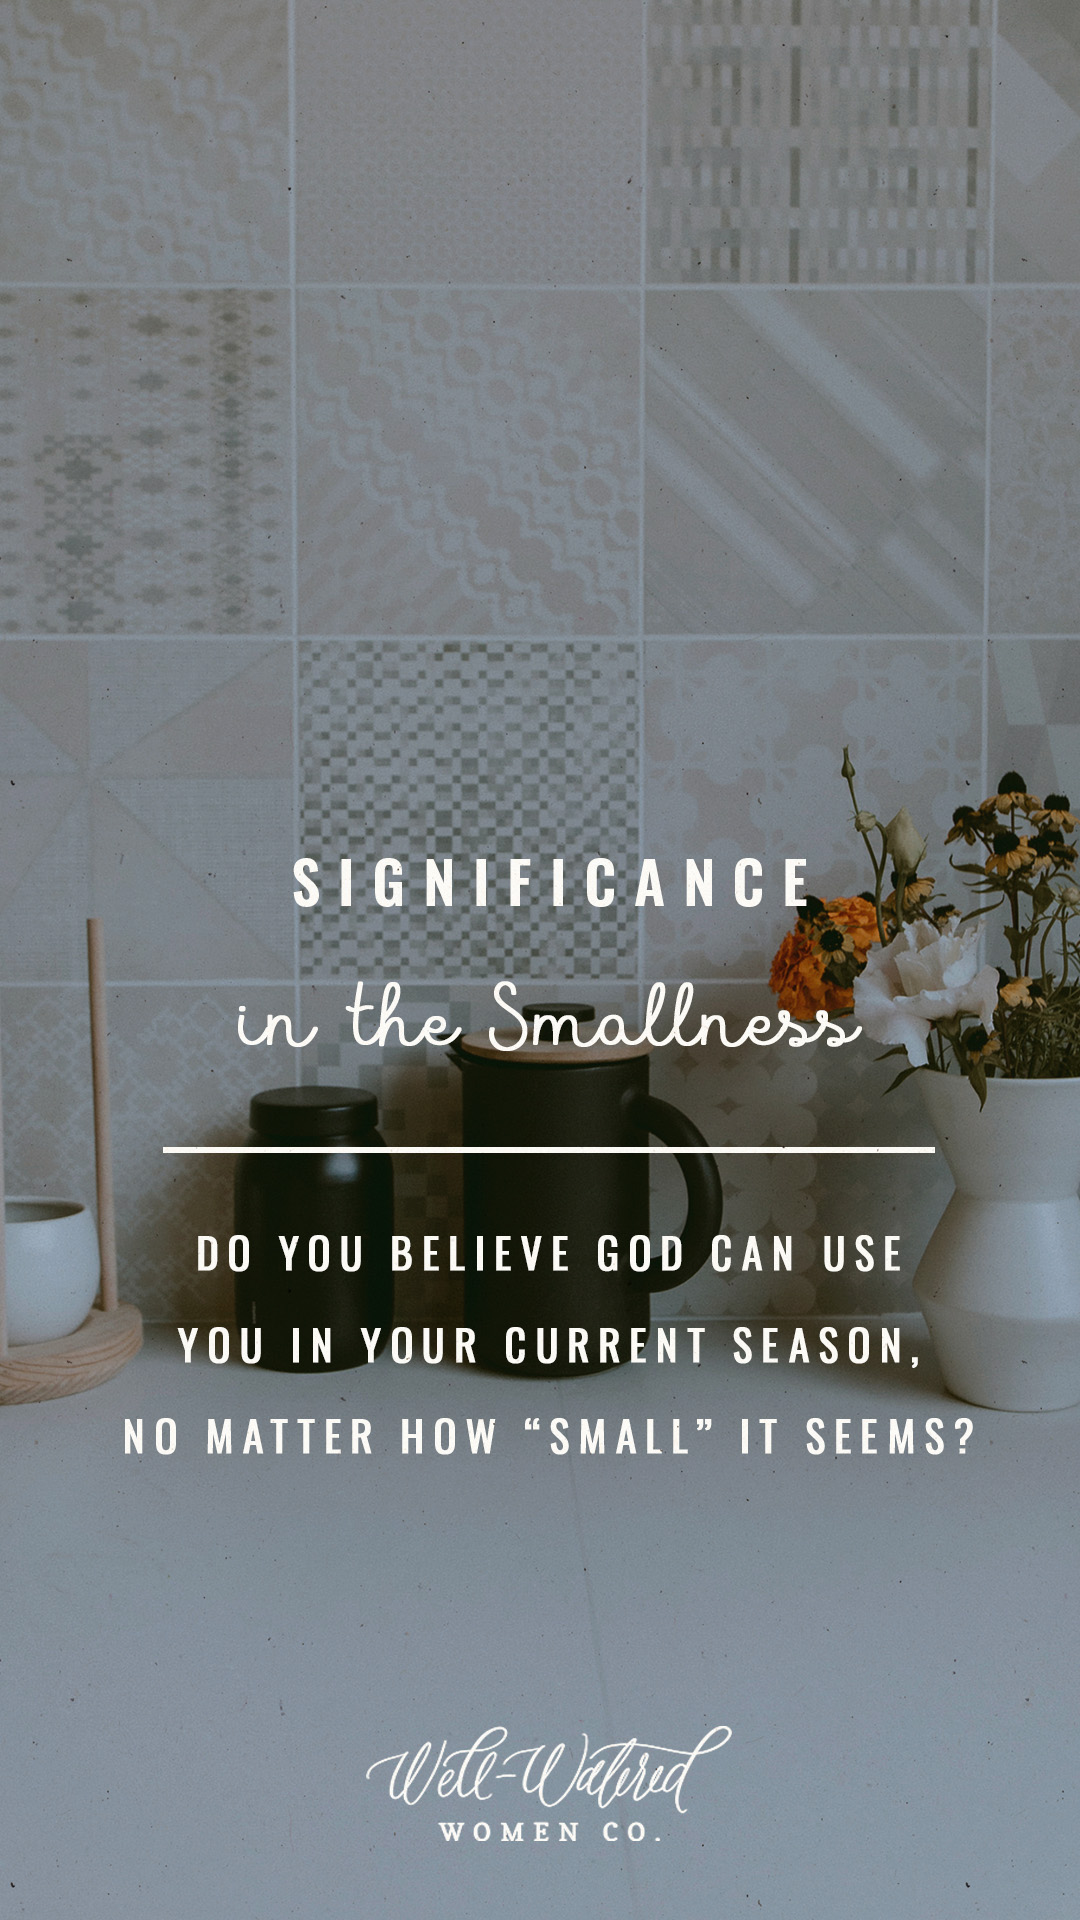 Well Watered Women Blog | Significance in the Smallness - God can use you in any season.